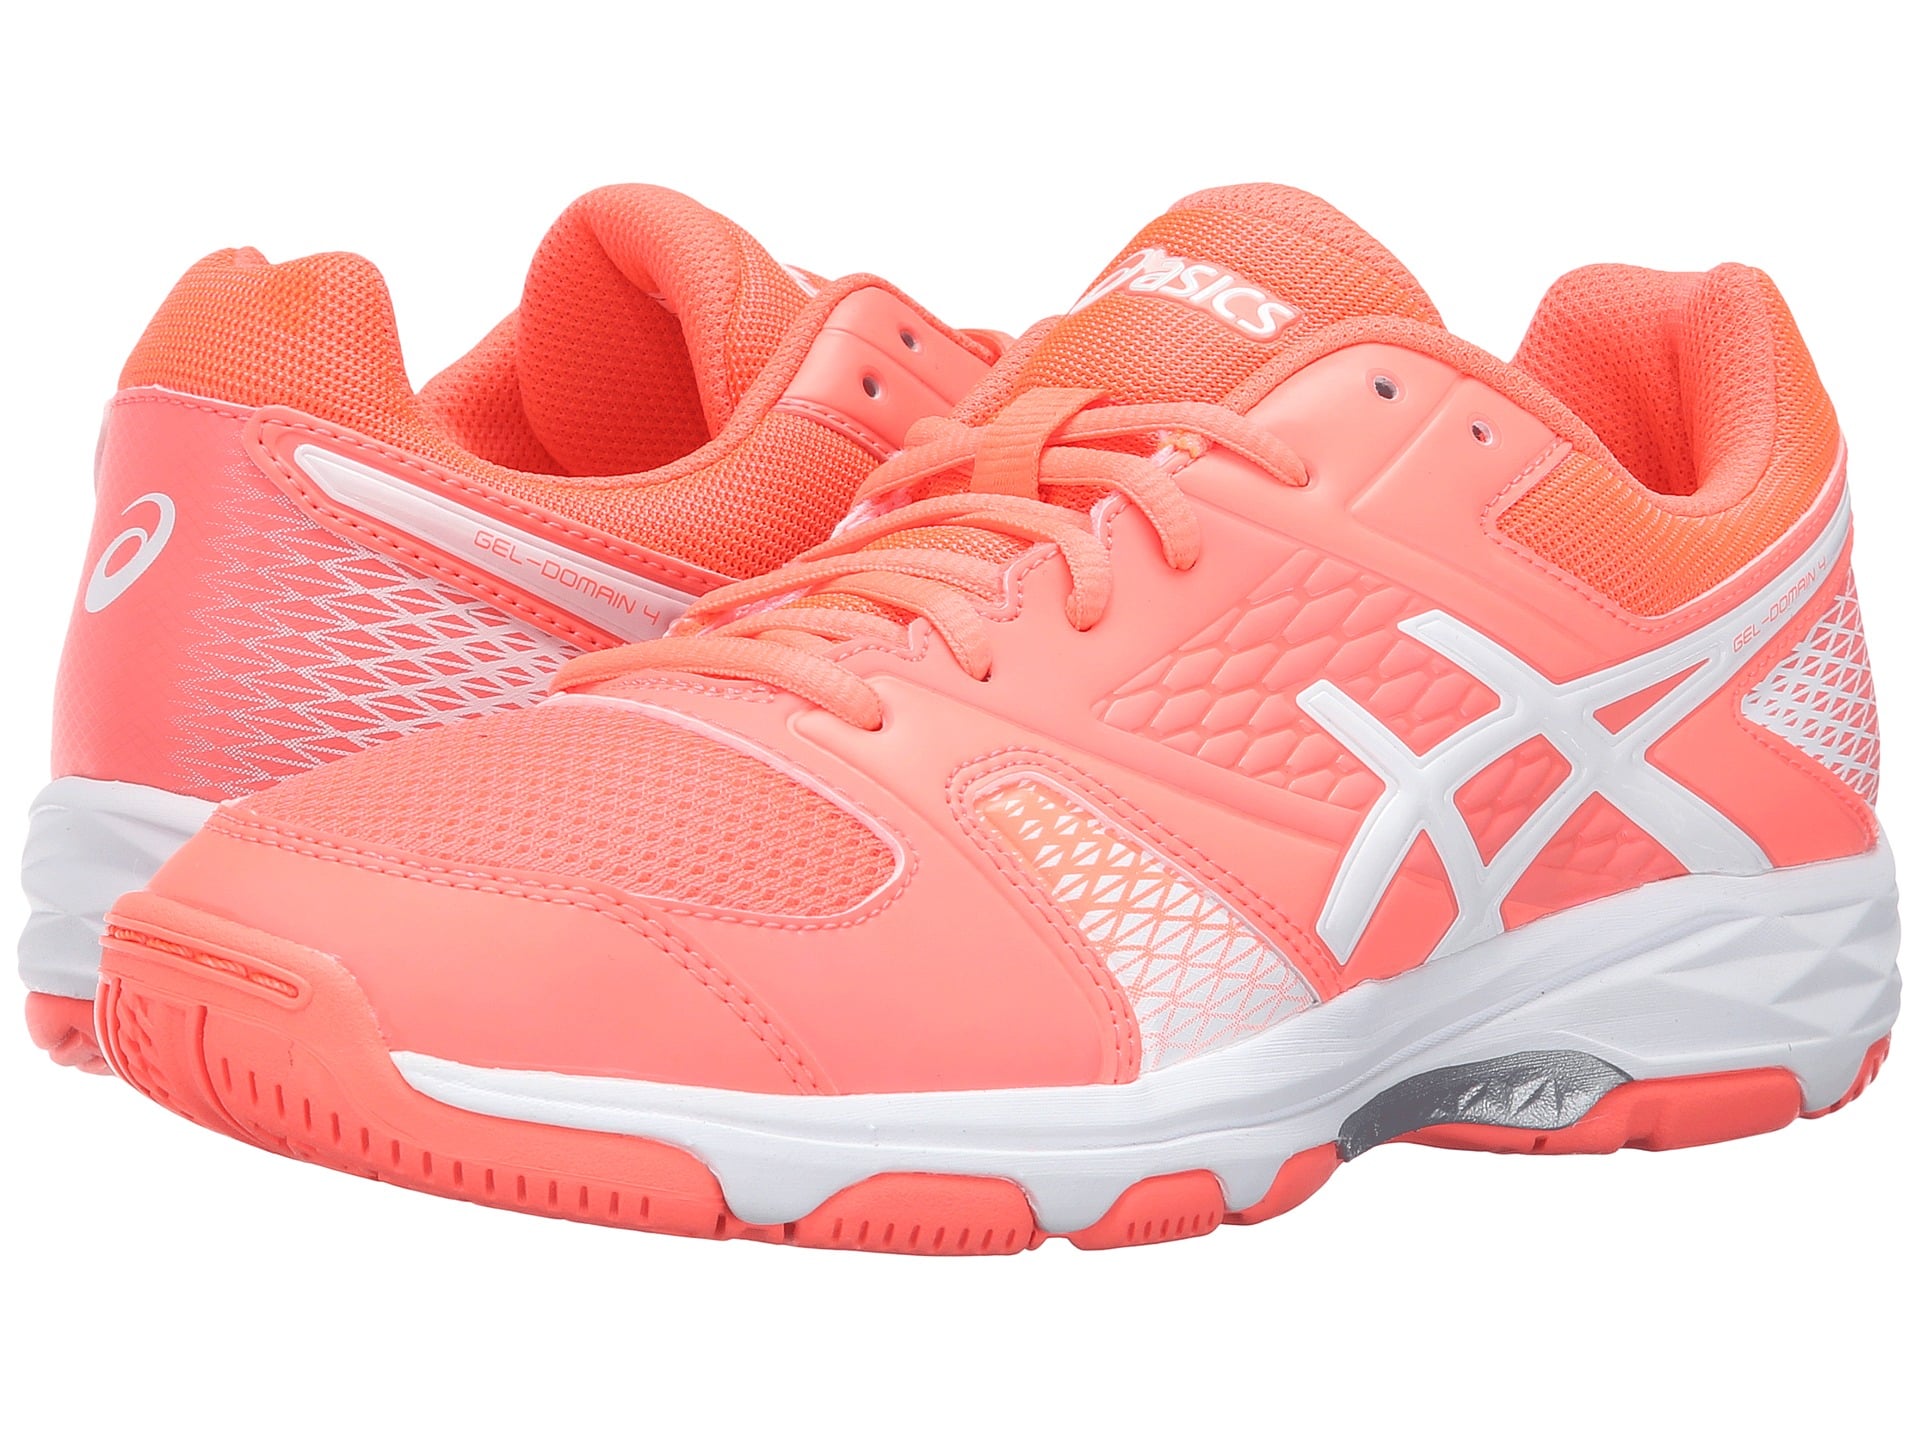 Asics Gel-Domain 4 | Are You Ready For This? 56 Favorite Sneakers of 2017 Are So Freaking Cool | POPSUGAR Fitness Photo 41